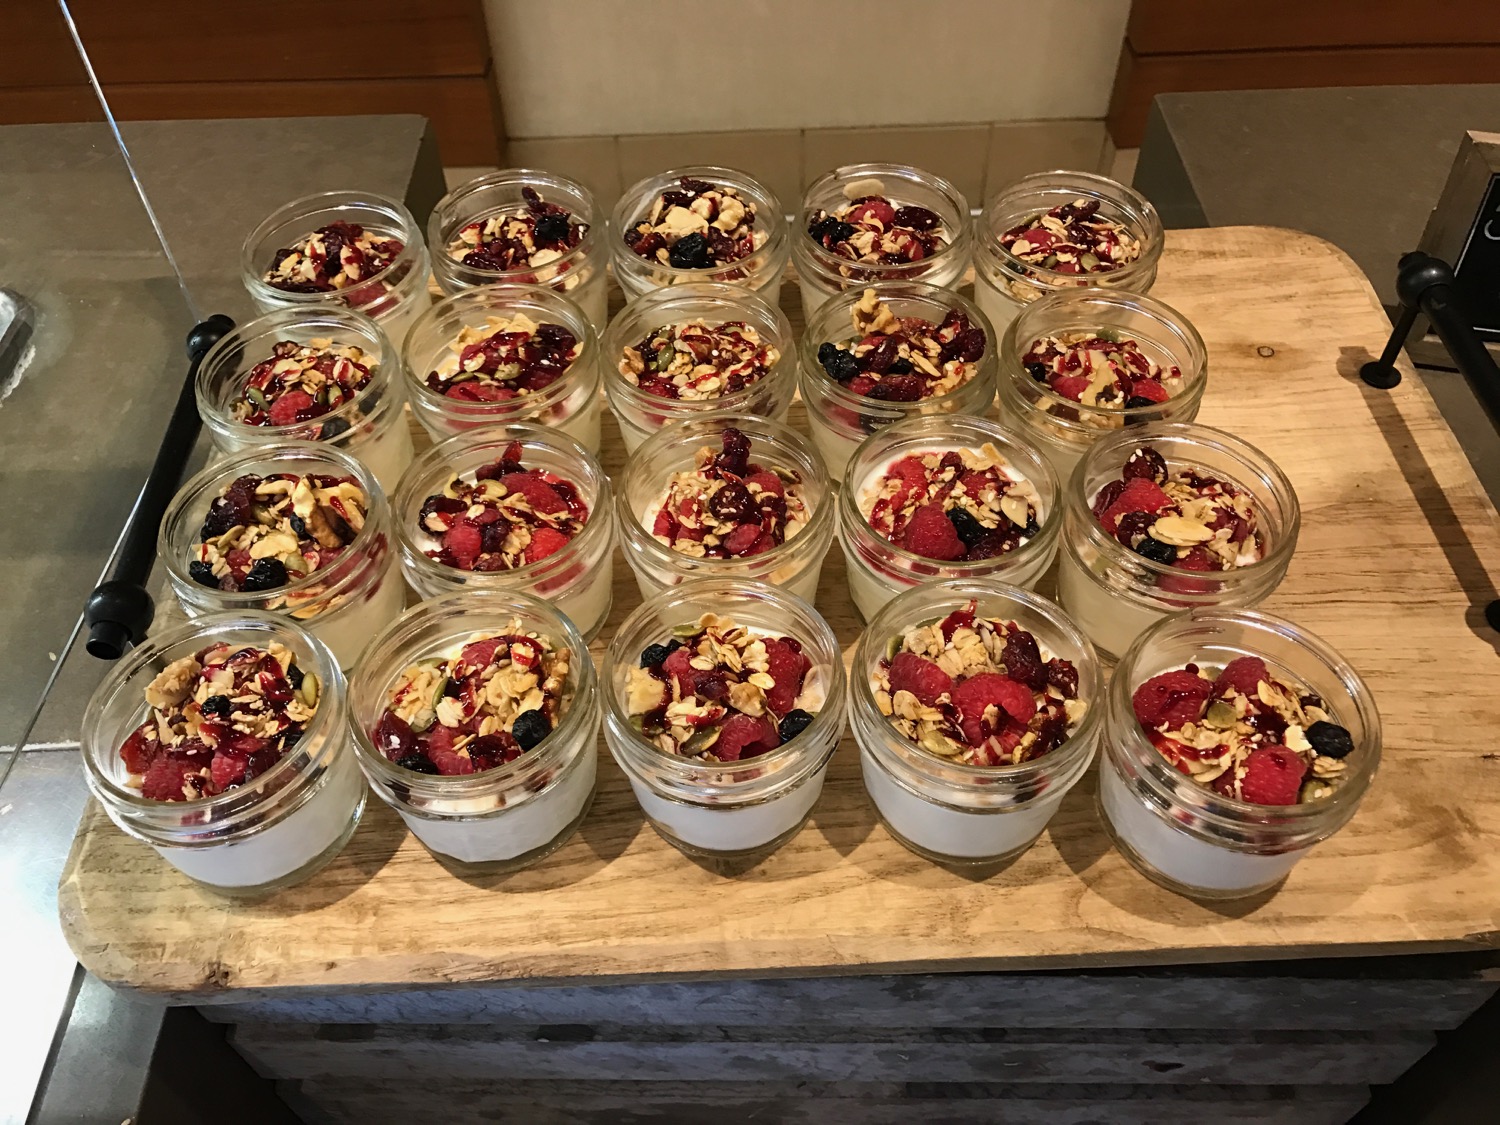 a group of jars of desserts